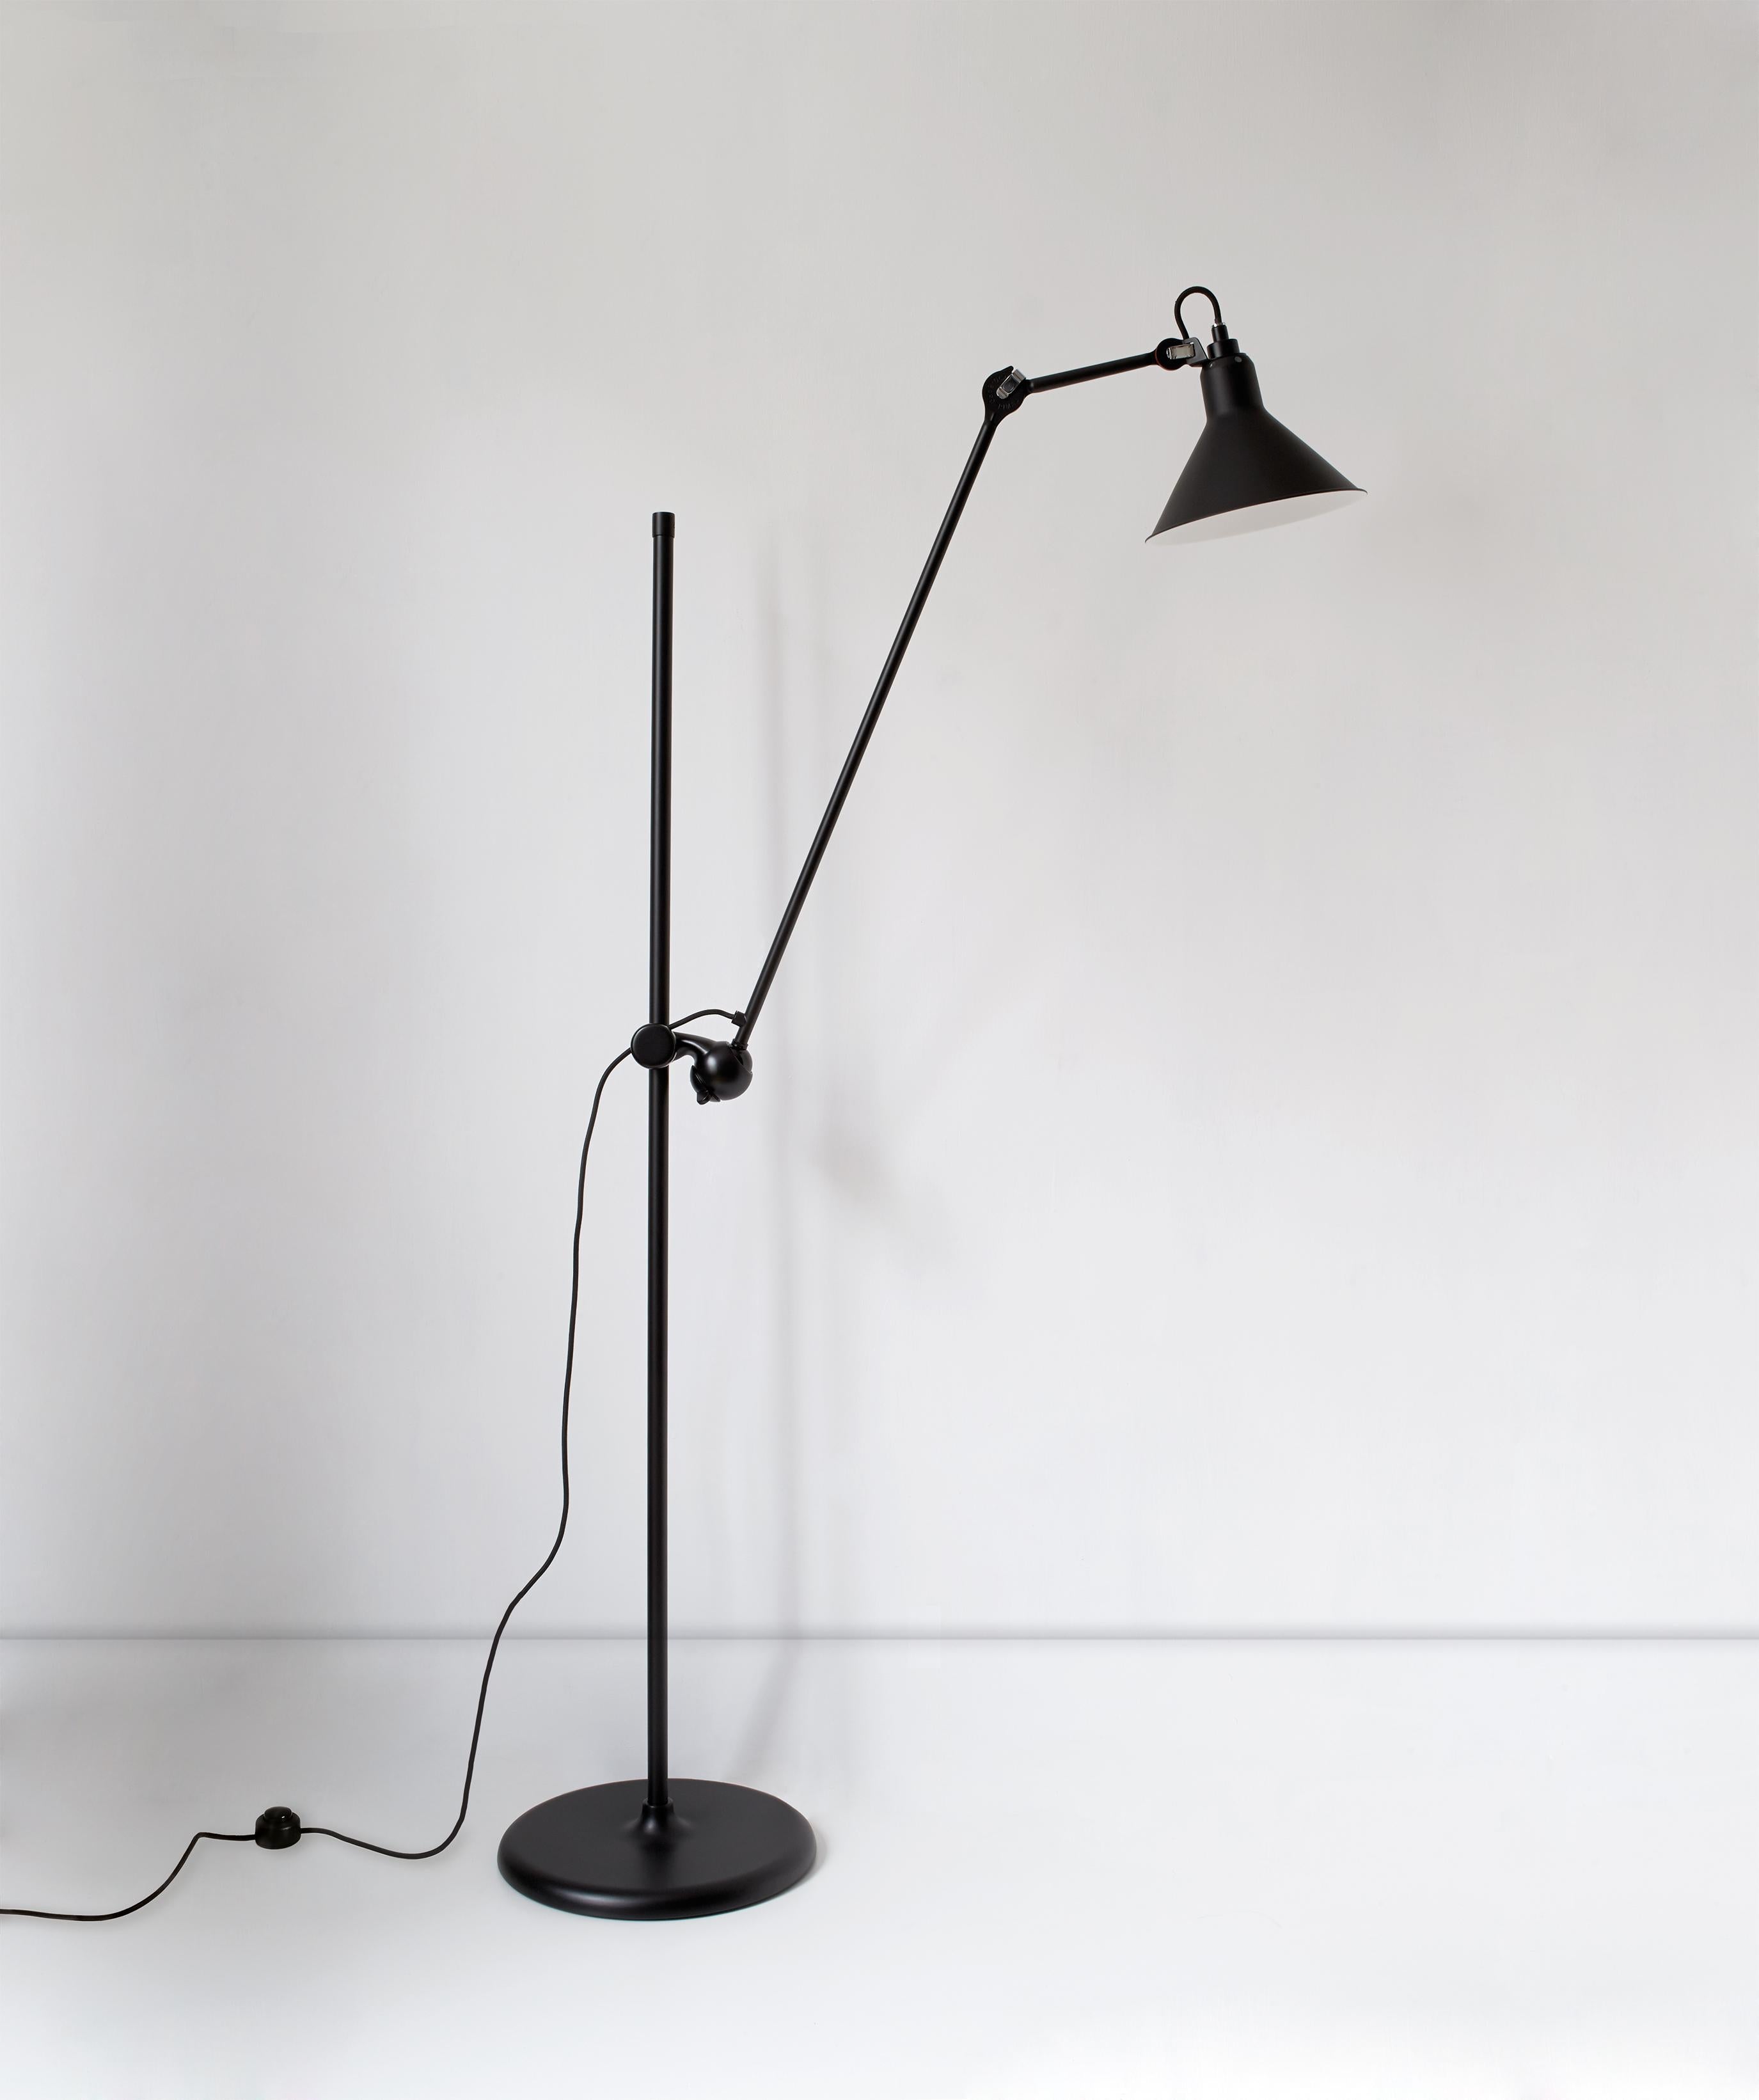 DCW Editions Lampe Gras N°215 Floor Lamp in Black Steel Arm and Red Shade by Bernard-Albin Gras
 
 In 1921 Bernard-Albin GRAS designed a series of lamps for use in offices and in industrial environments. The GRAS lamp, as it was subsequently called,